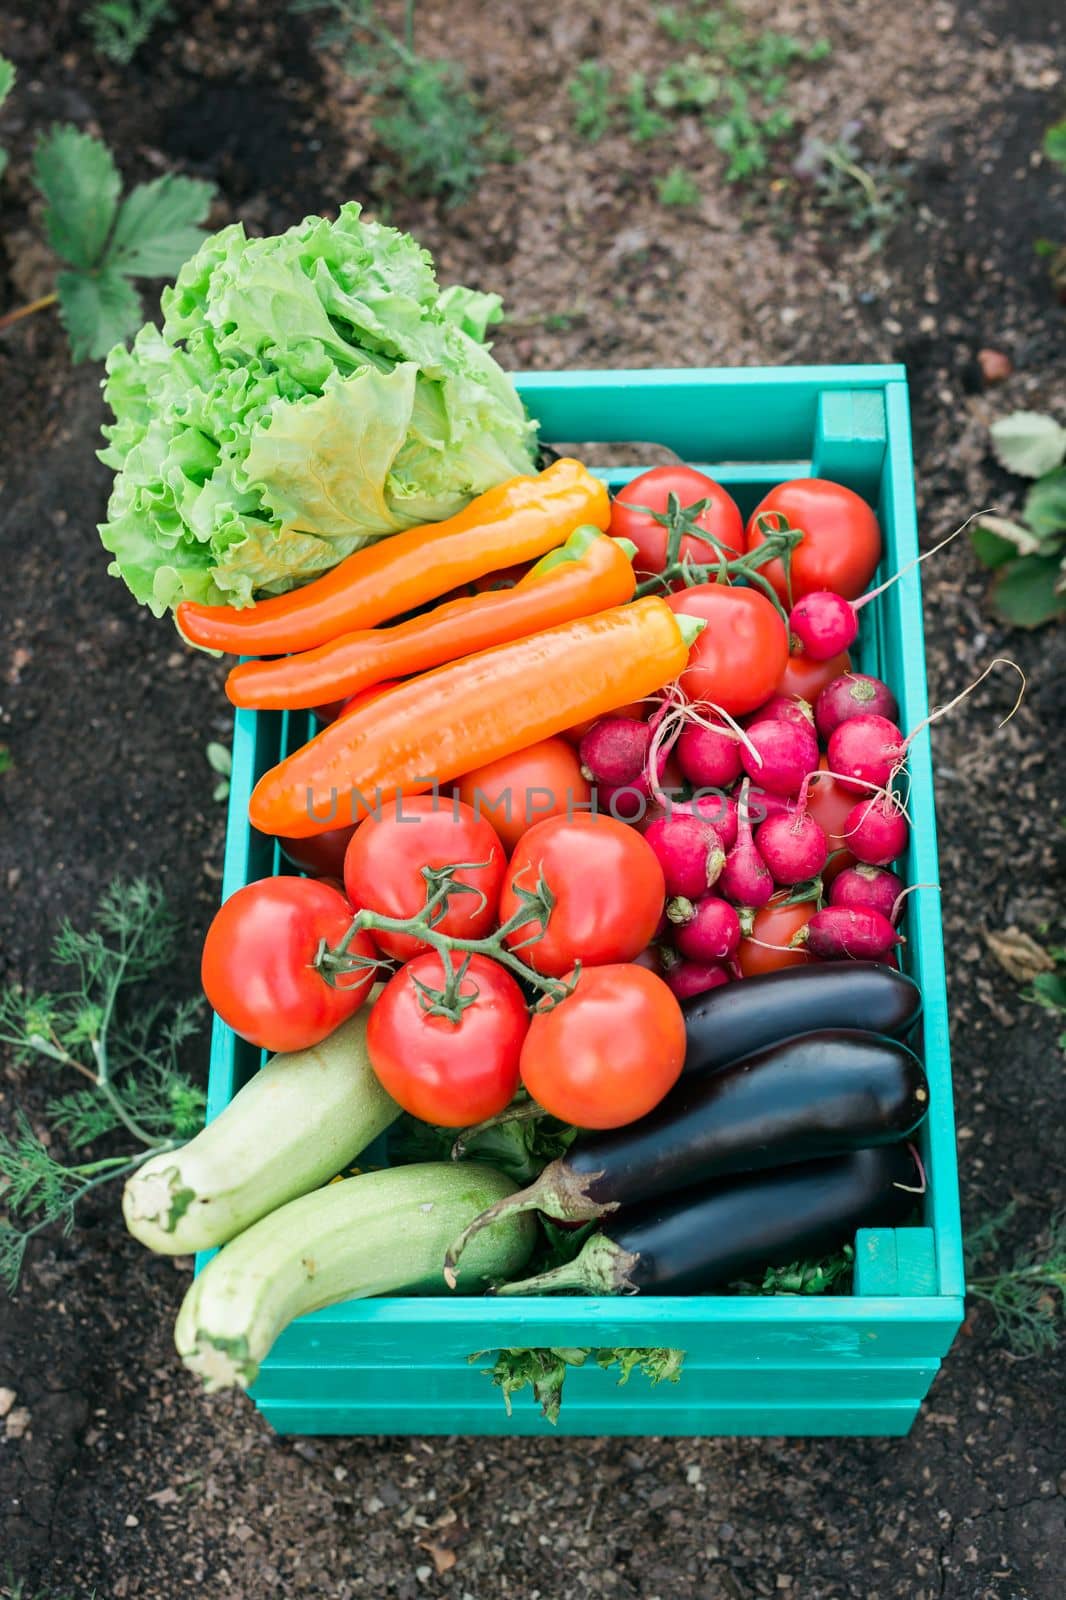 Wooden box filled fresh vegetables in garden - harvesting and gardening by Satura86